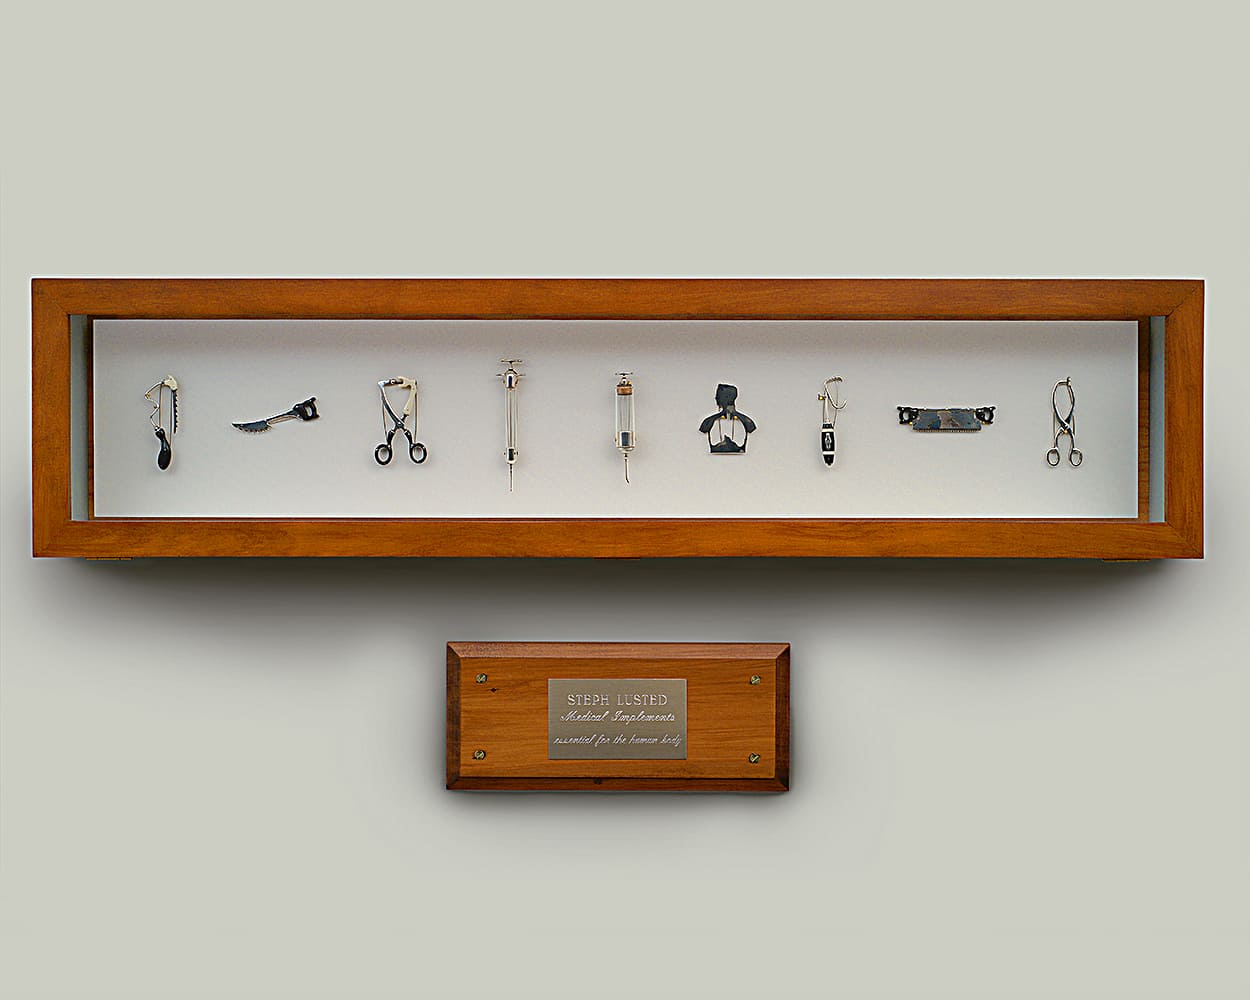 Medical Implements